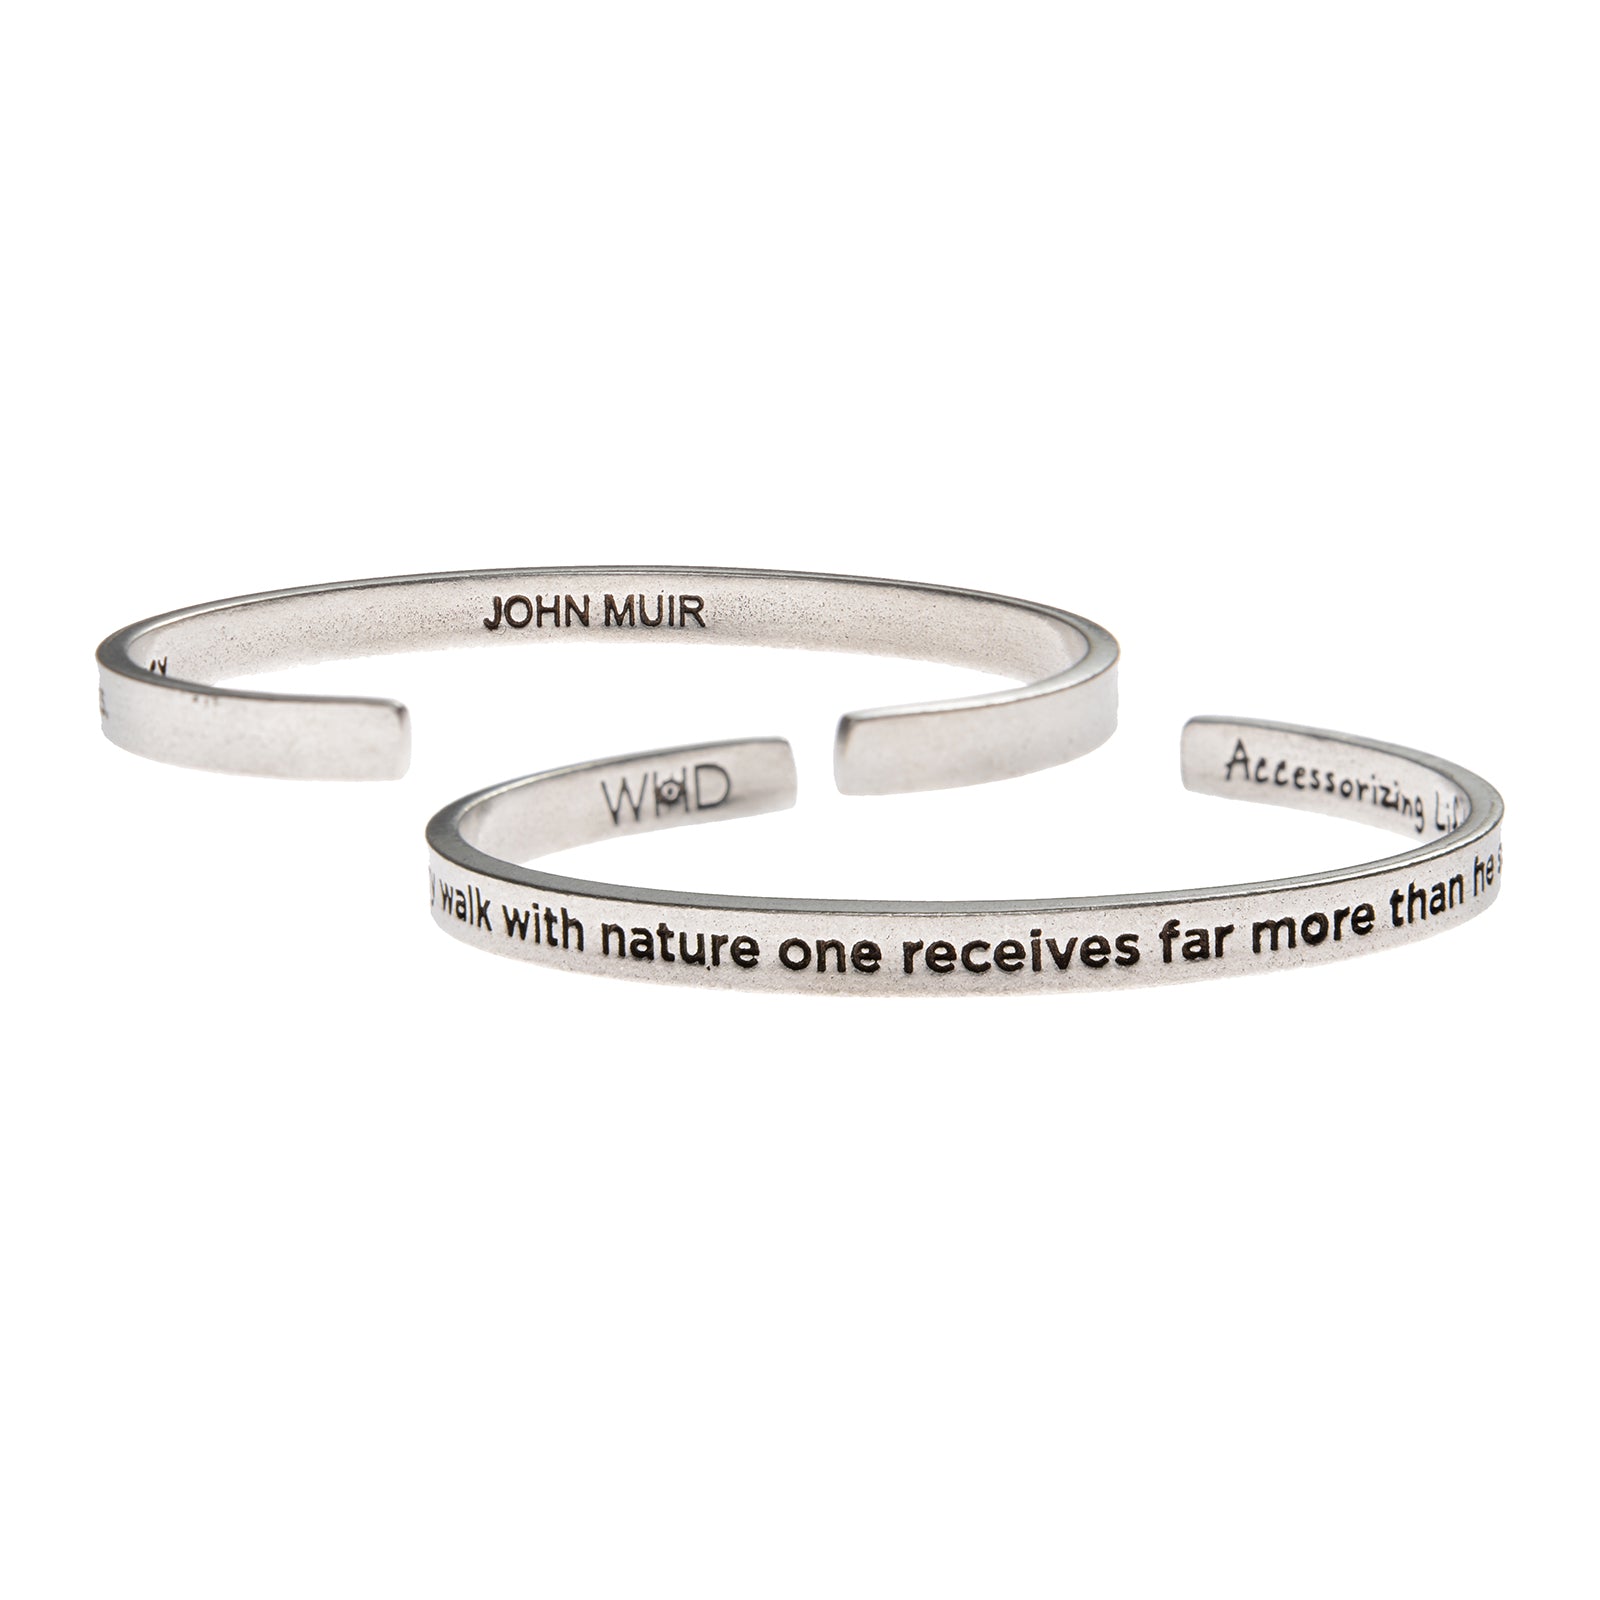 In every walk with nature one receives far more than he seeks John Muir Quotable Cuff